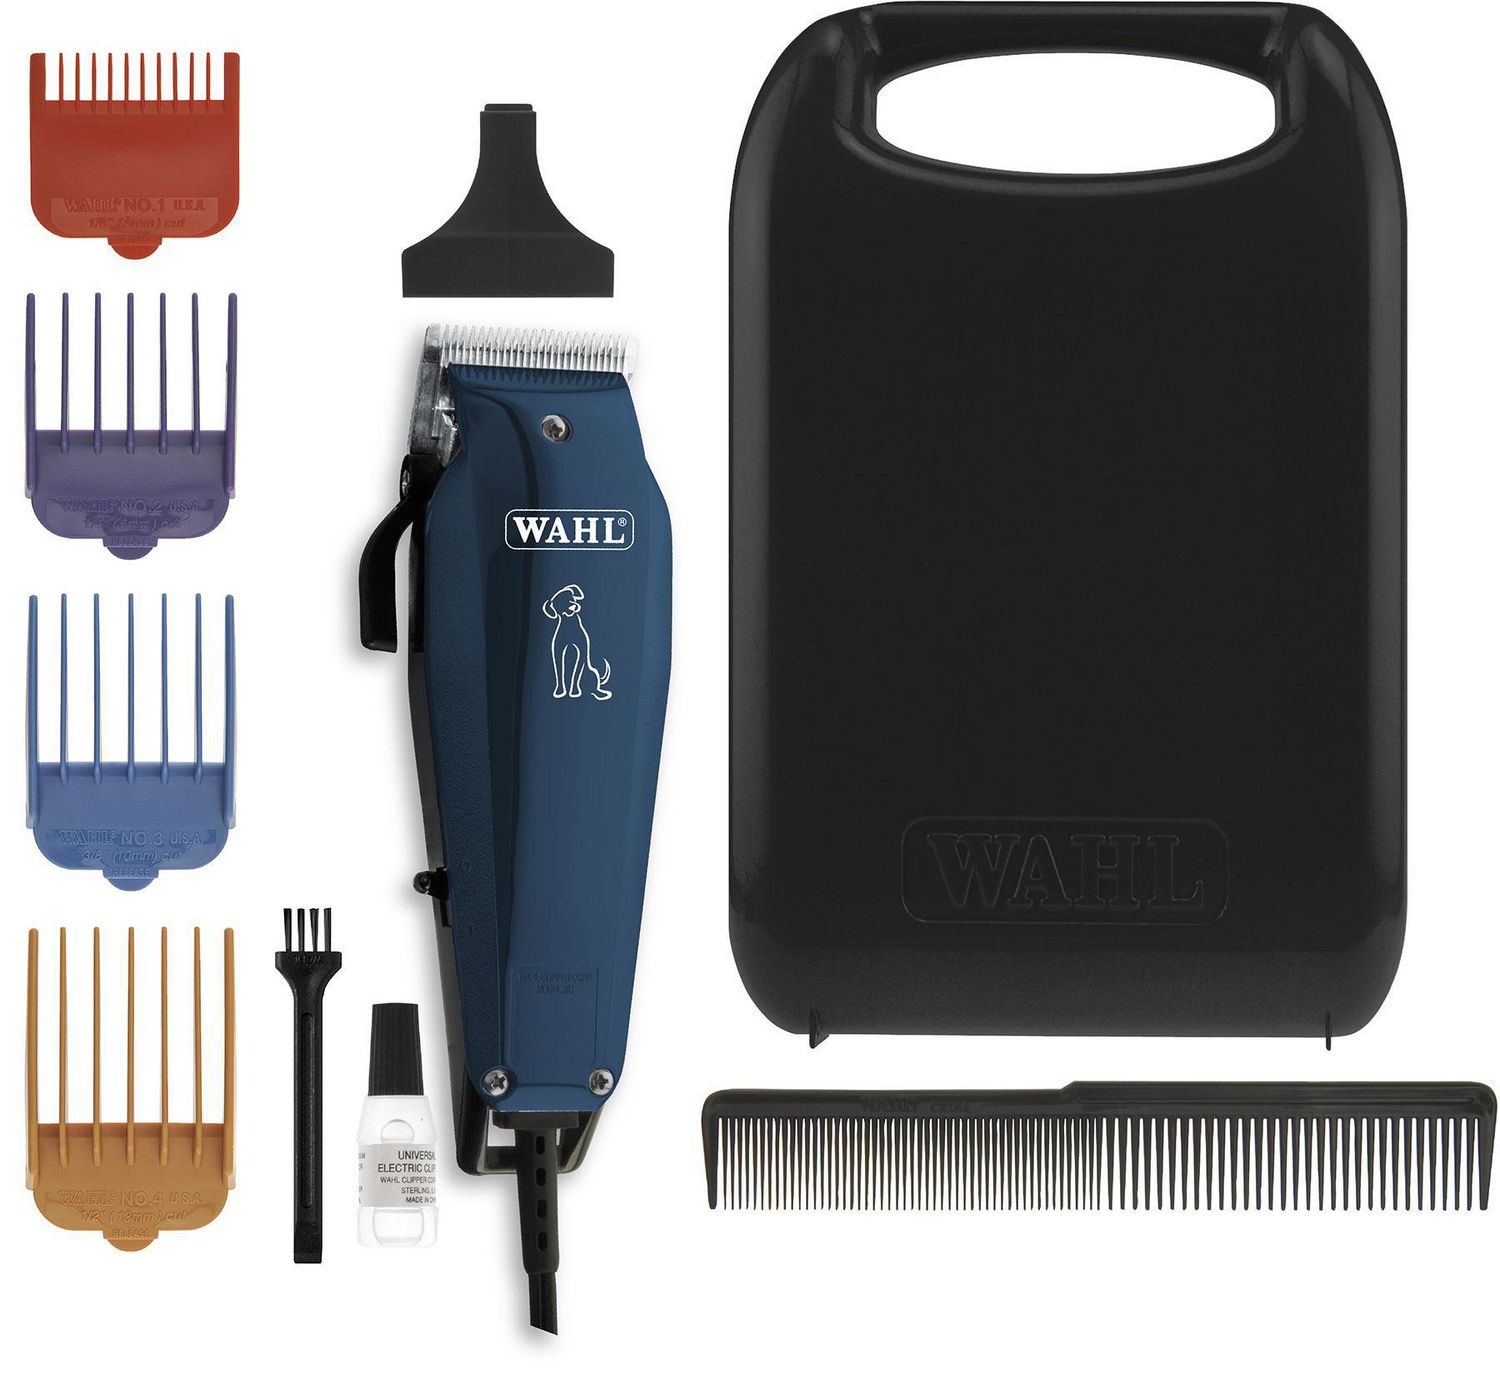 wahl dog clippers for dummies